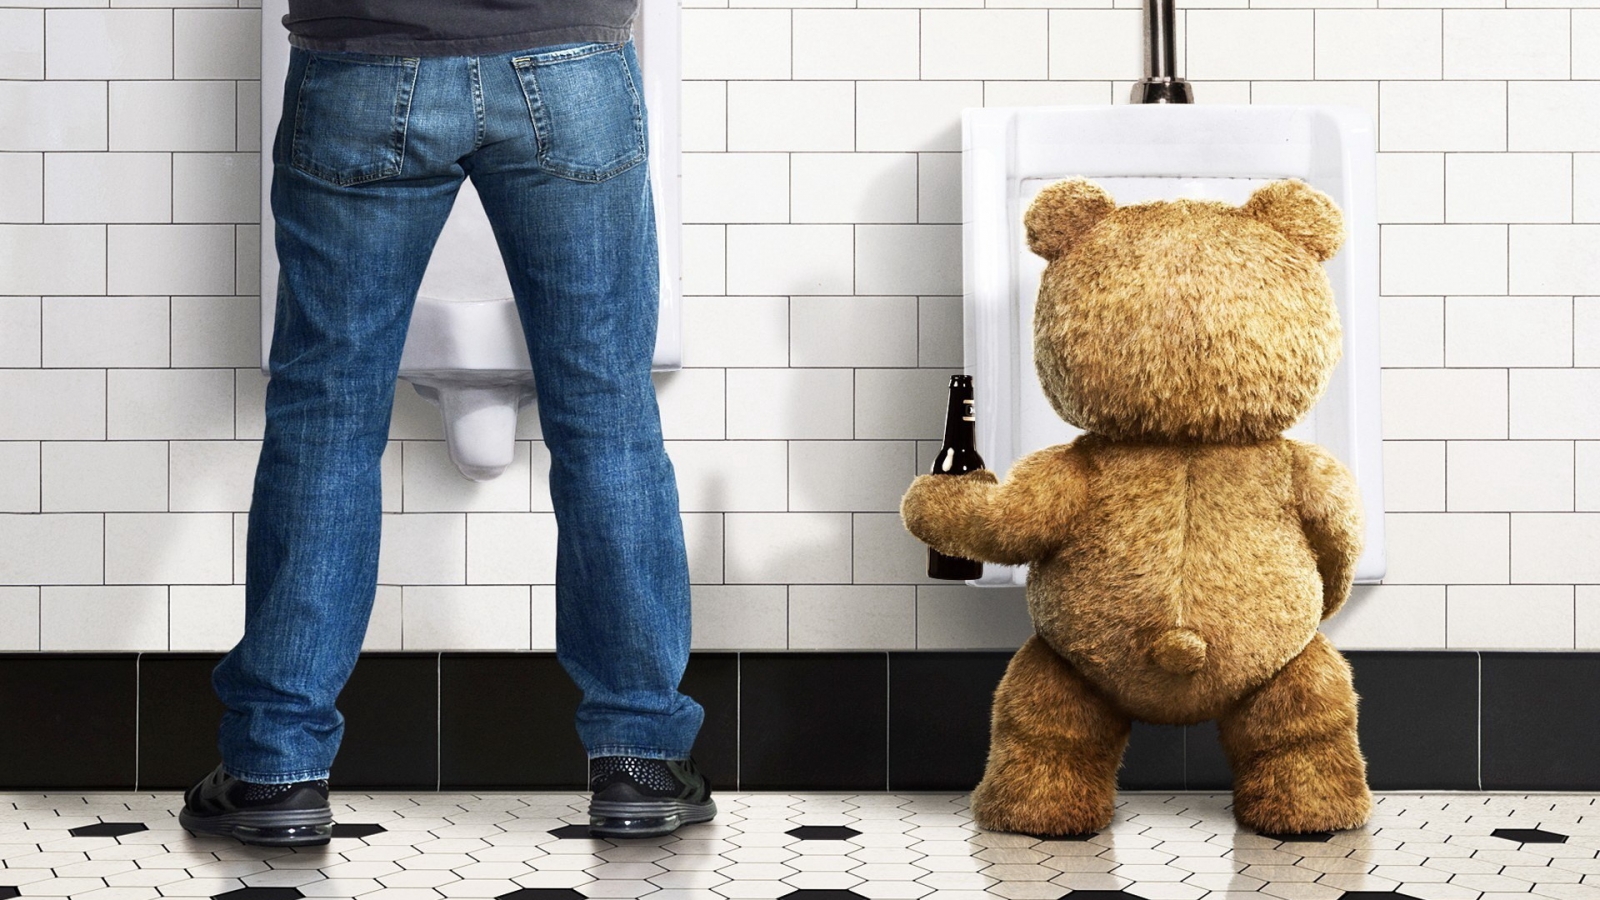 Ted Movie for 1600 x 900 HDTV resolution